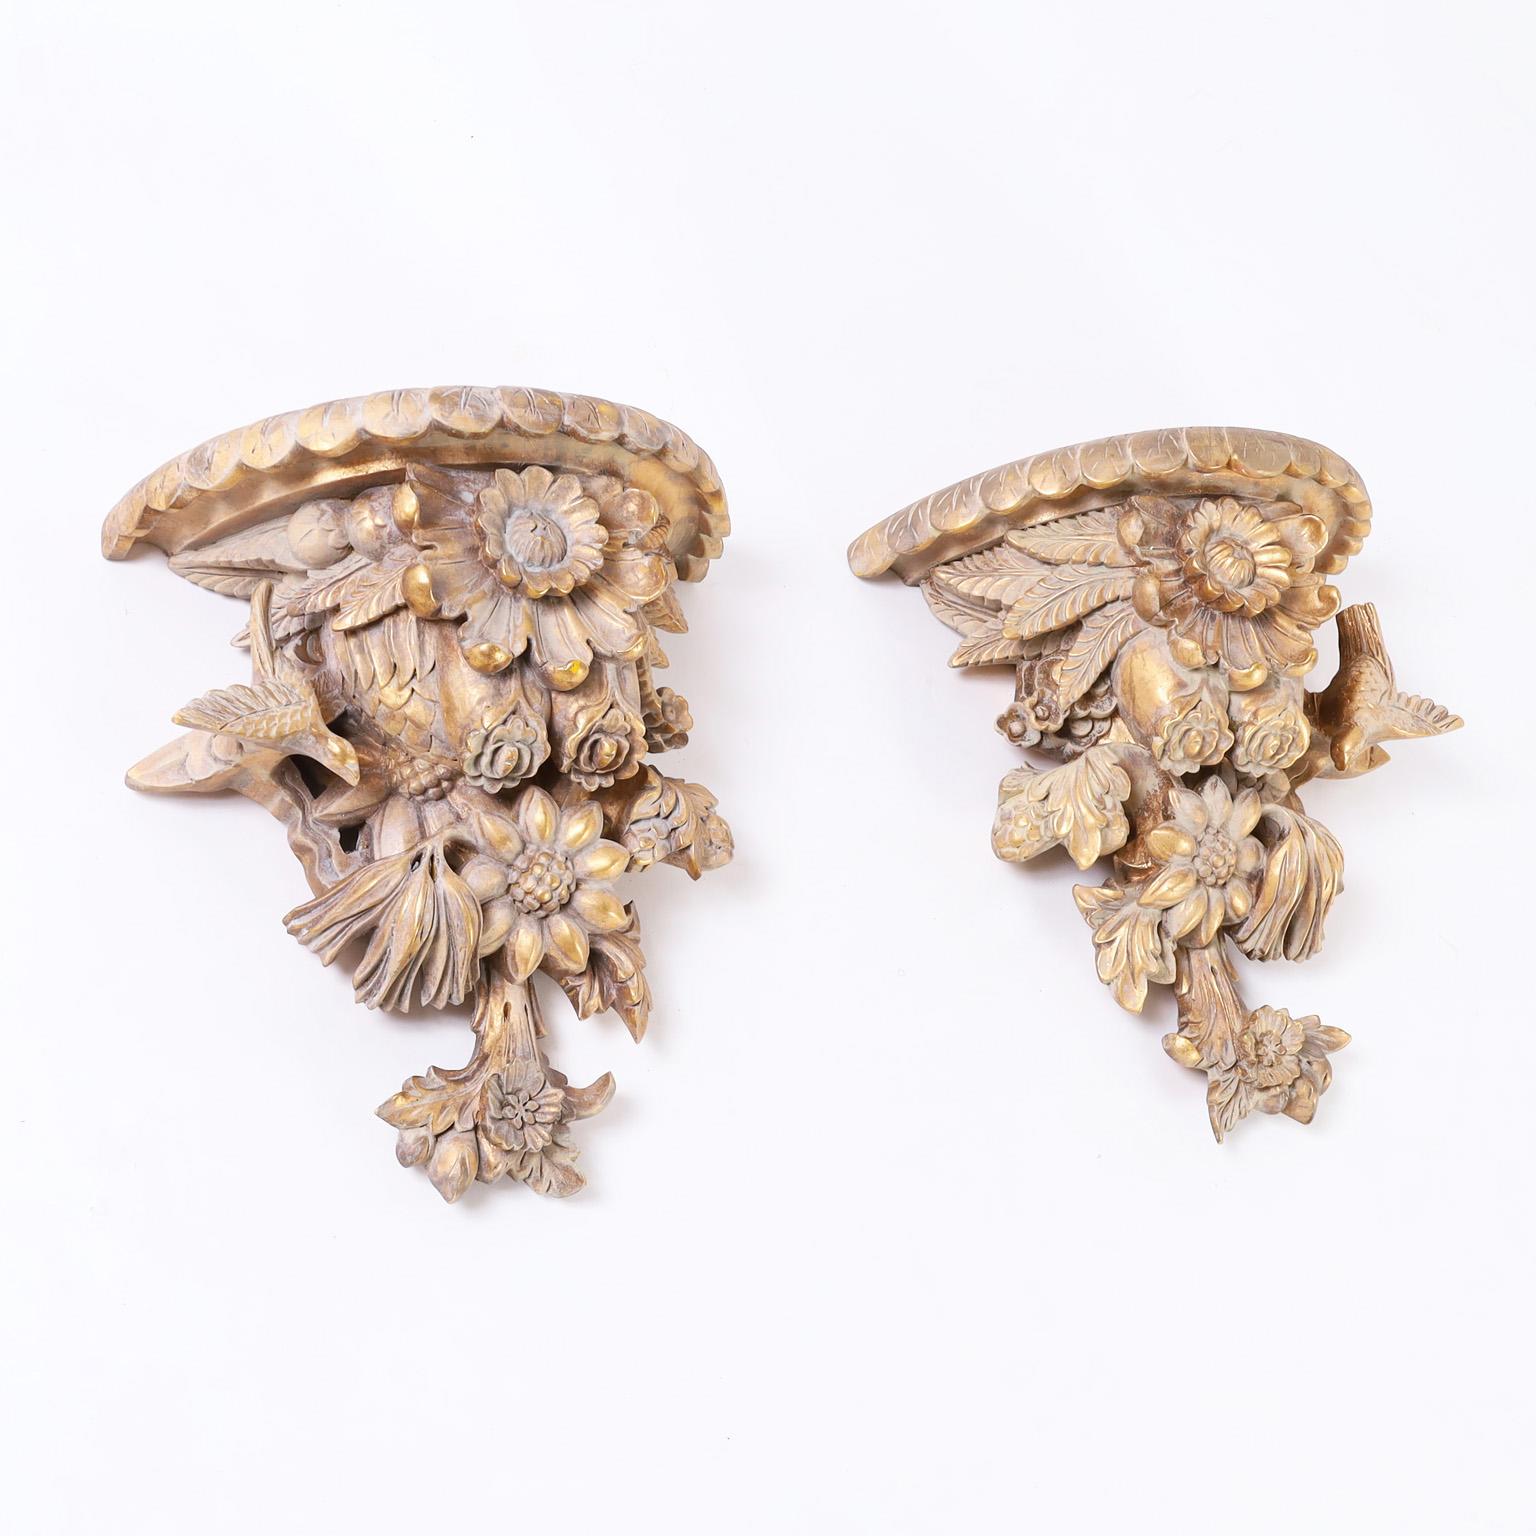 Rococo Pair of Carved Wood Wall Brackets